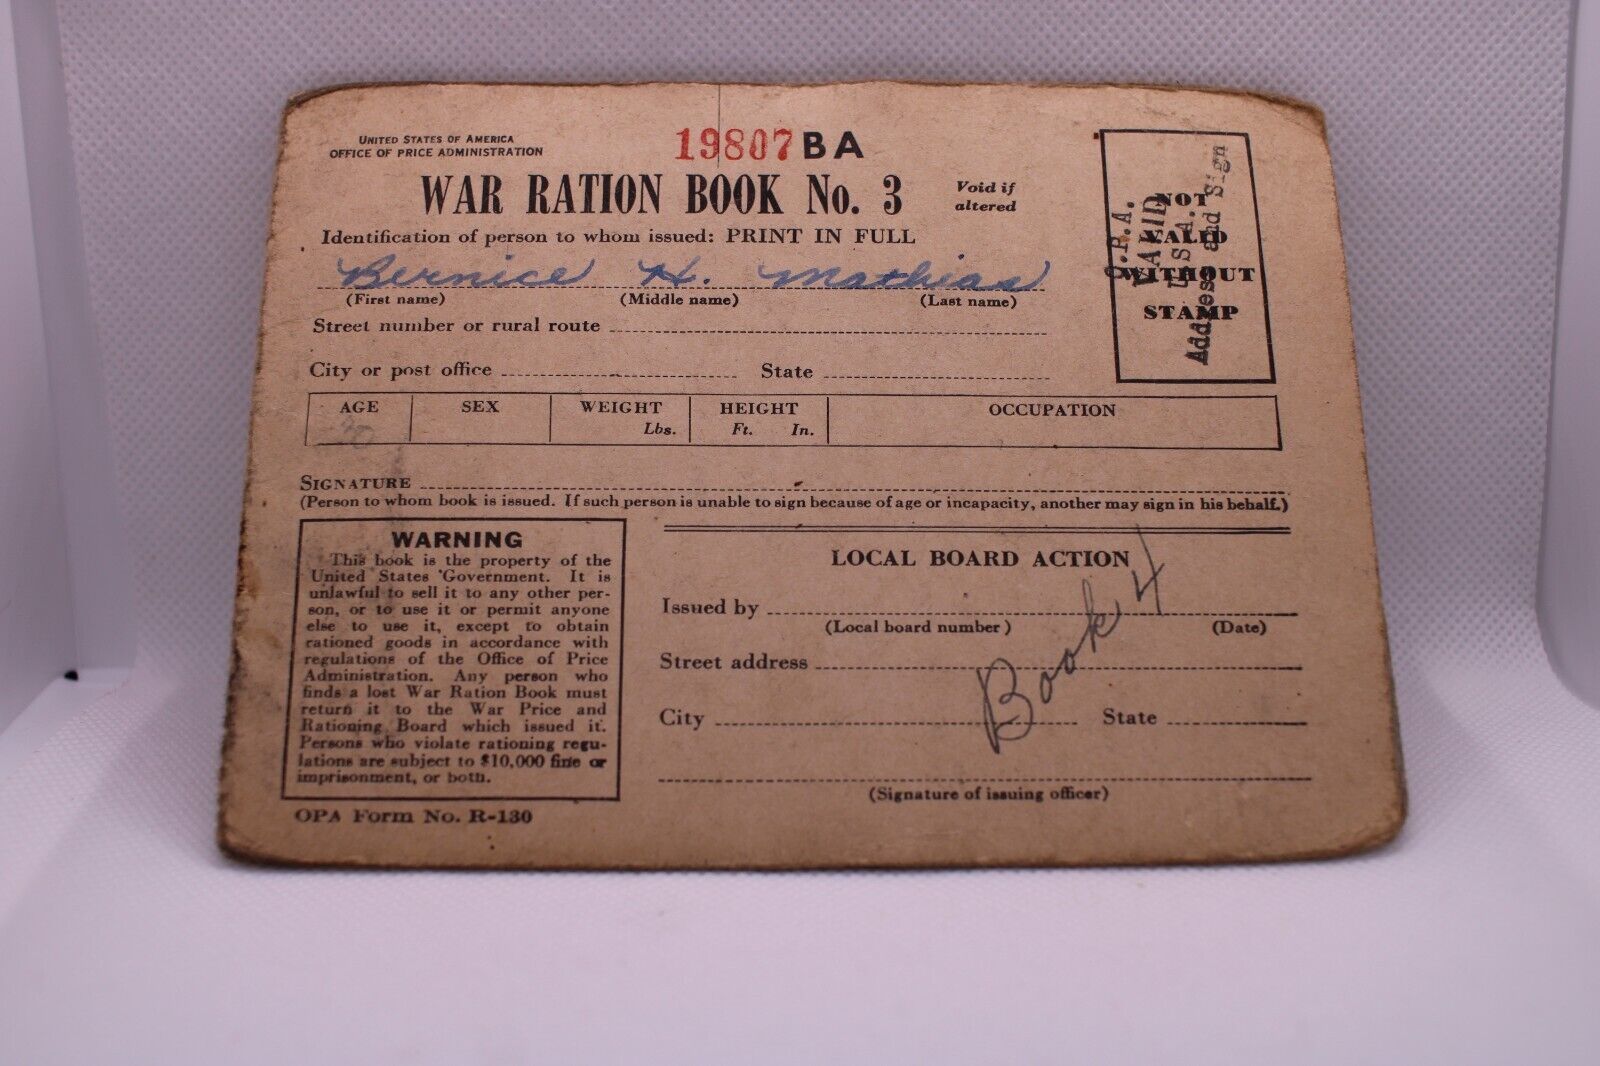 Collectible War Ration Book No. 3 with intact stamps inside